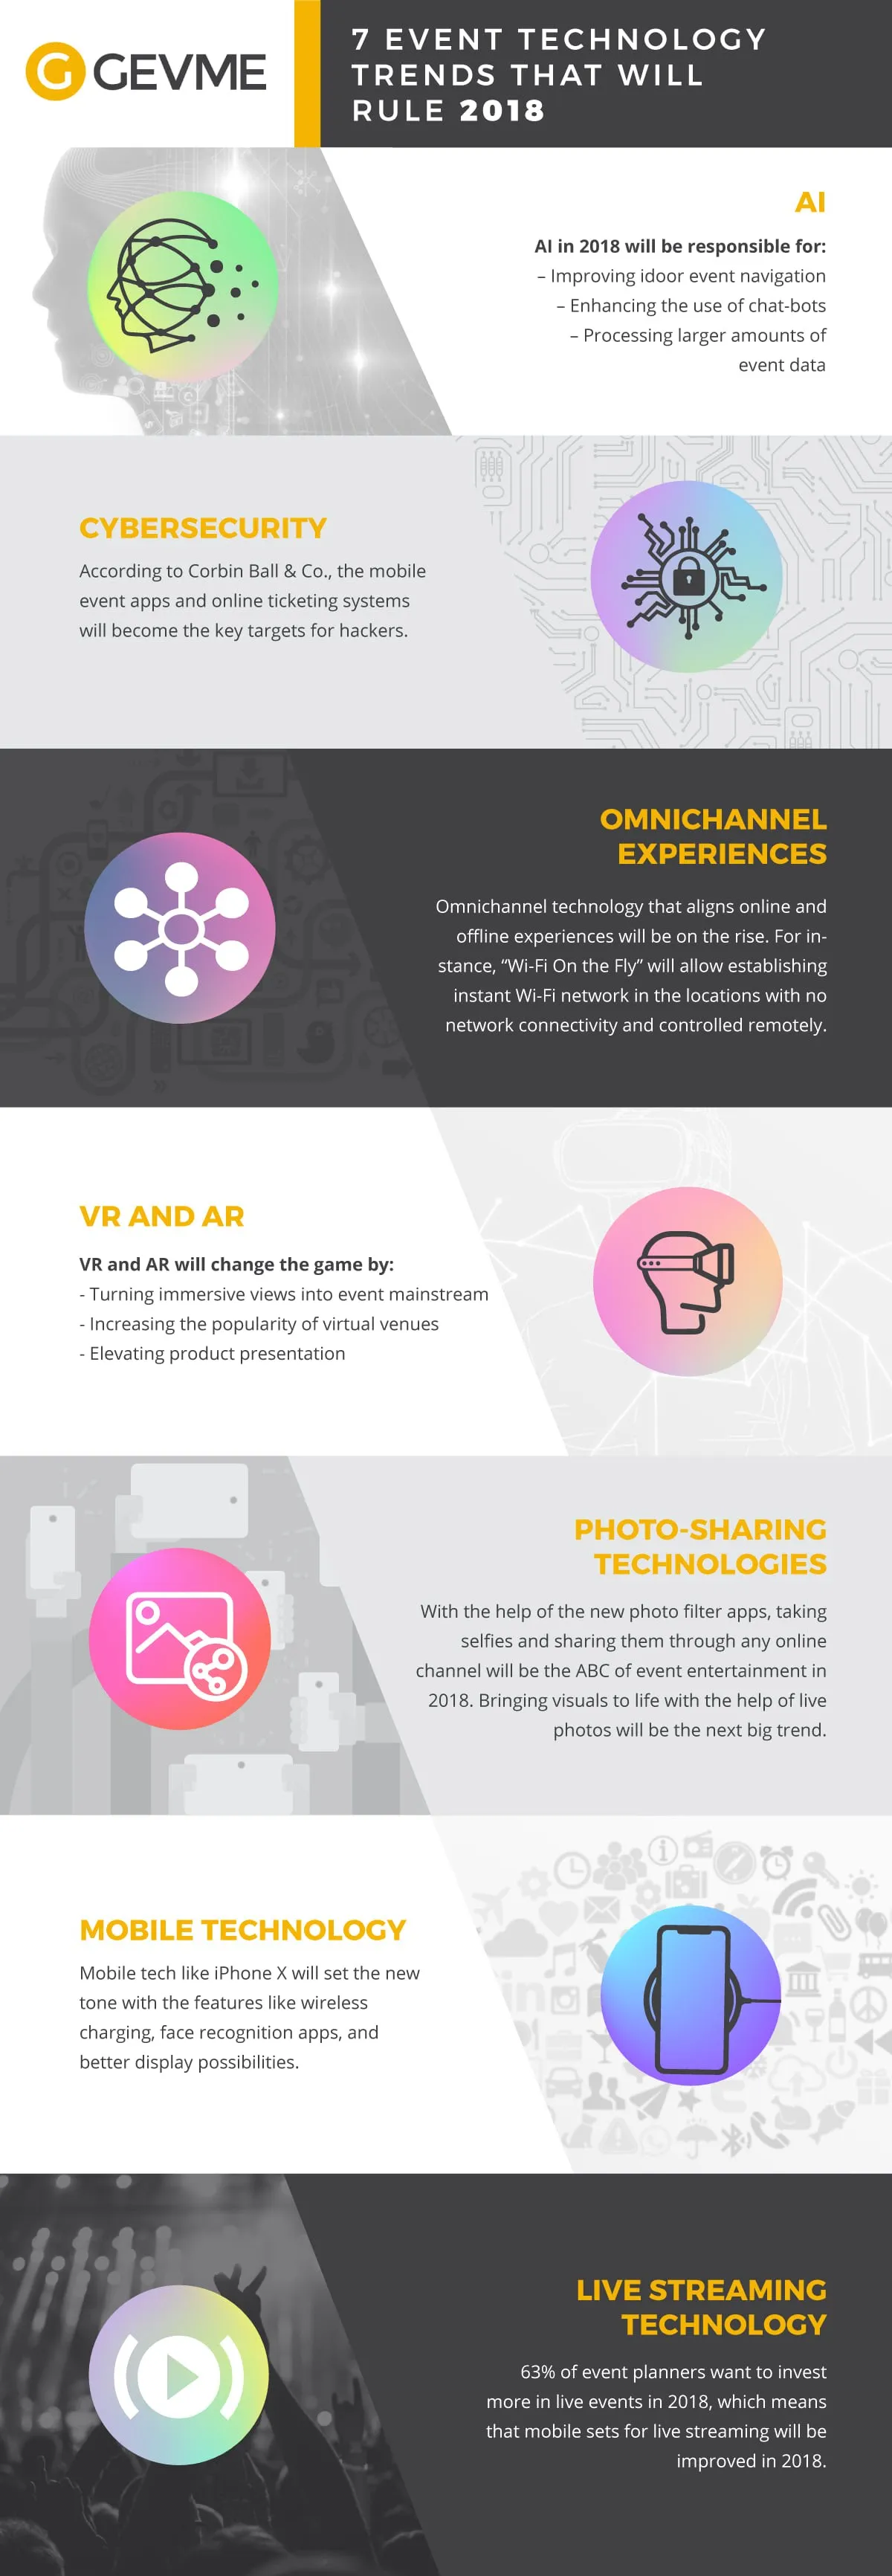 Event Technology Trends in 2018 - #Infographic